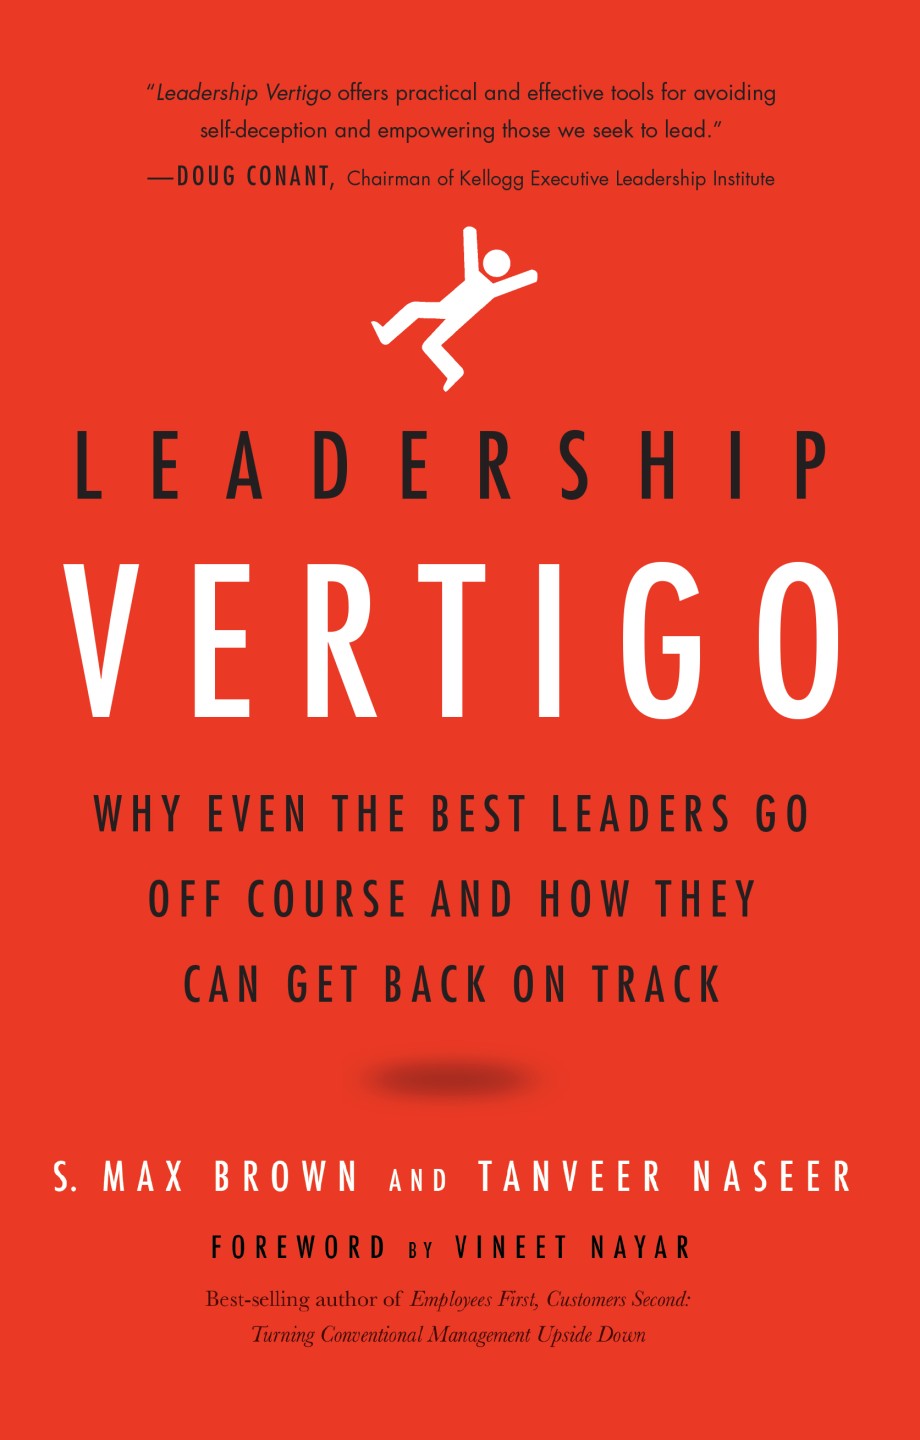 Leadership Vertigo Why Even the Best Leaders Go Off Course and How They Can Get Back On Track